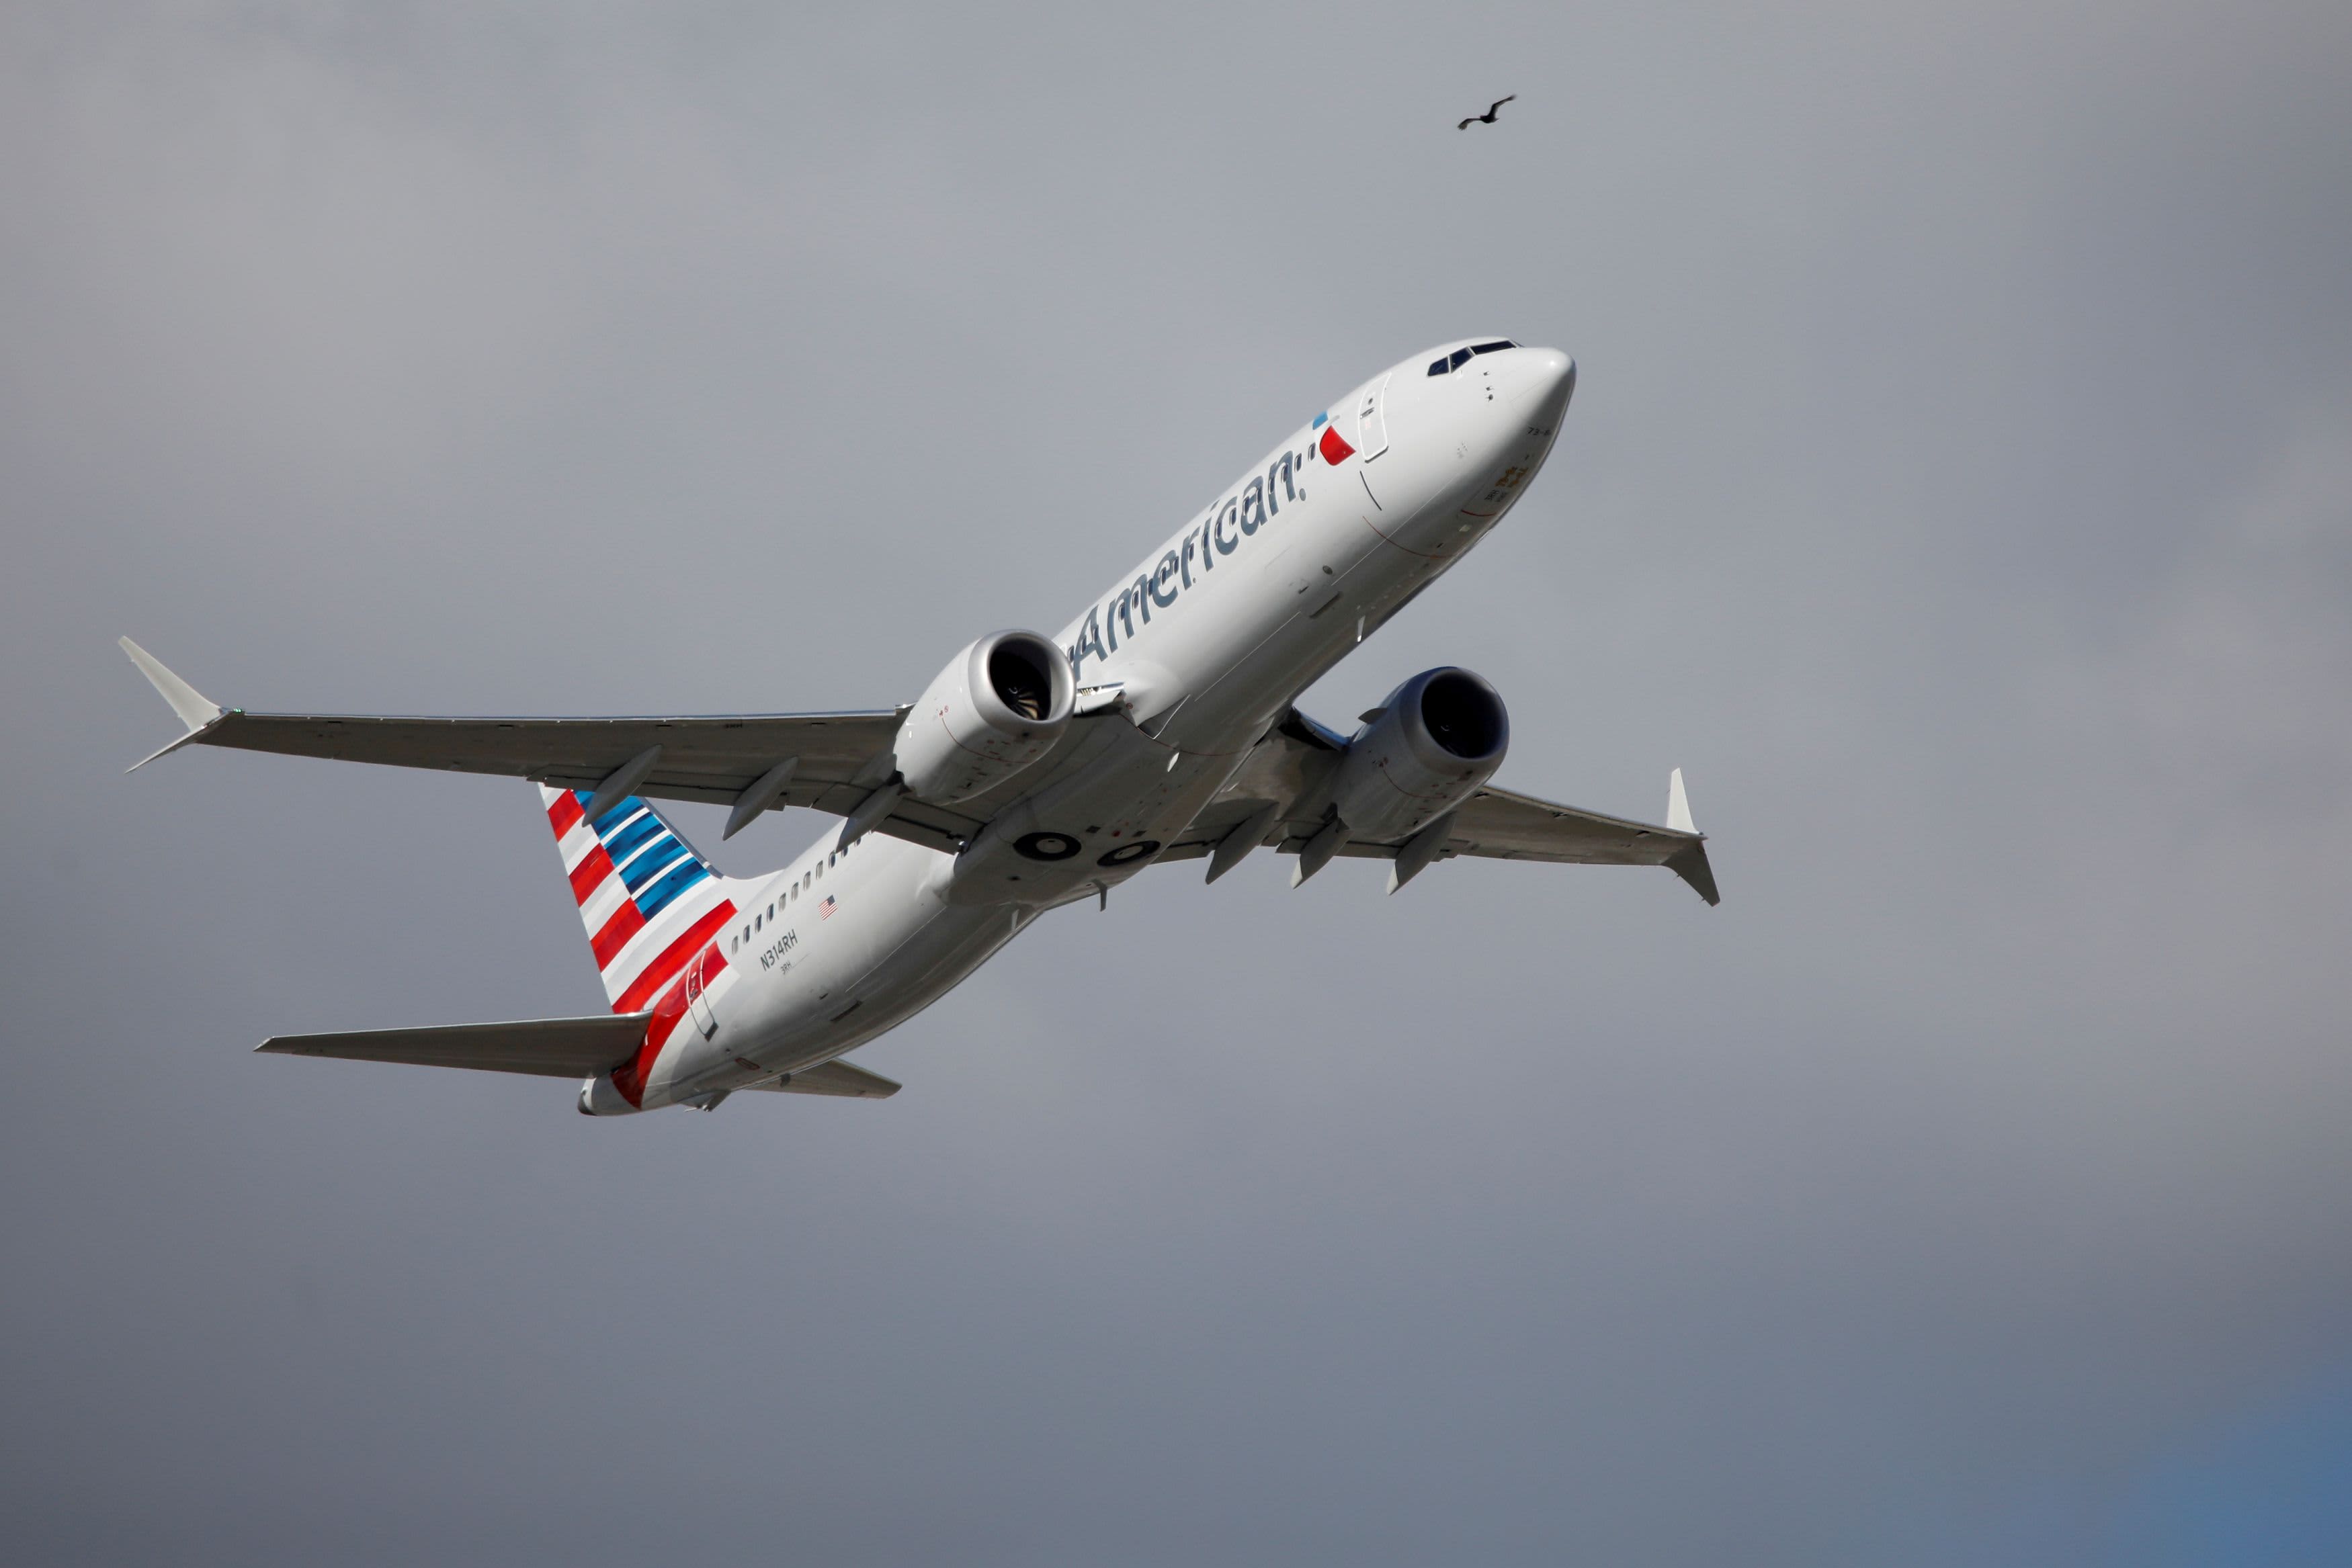 American Airlines plans to support $ 5 billion in sales, supported by a regular listing program